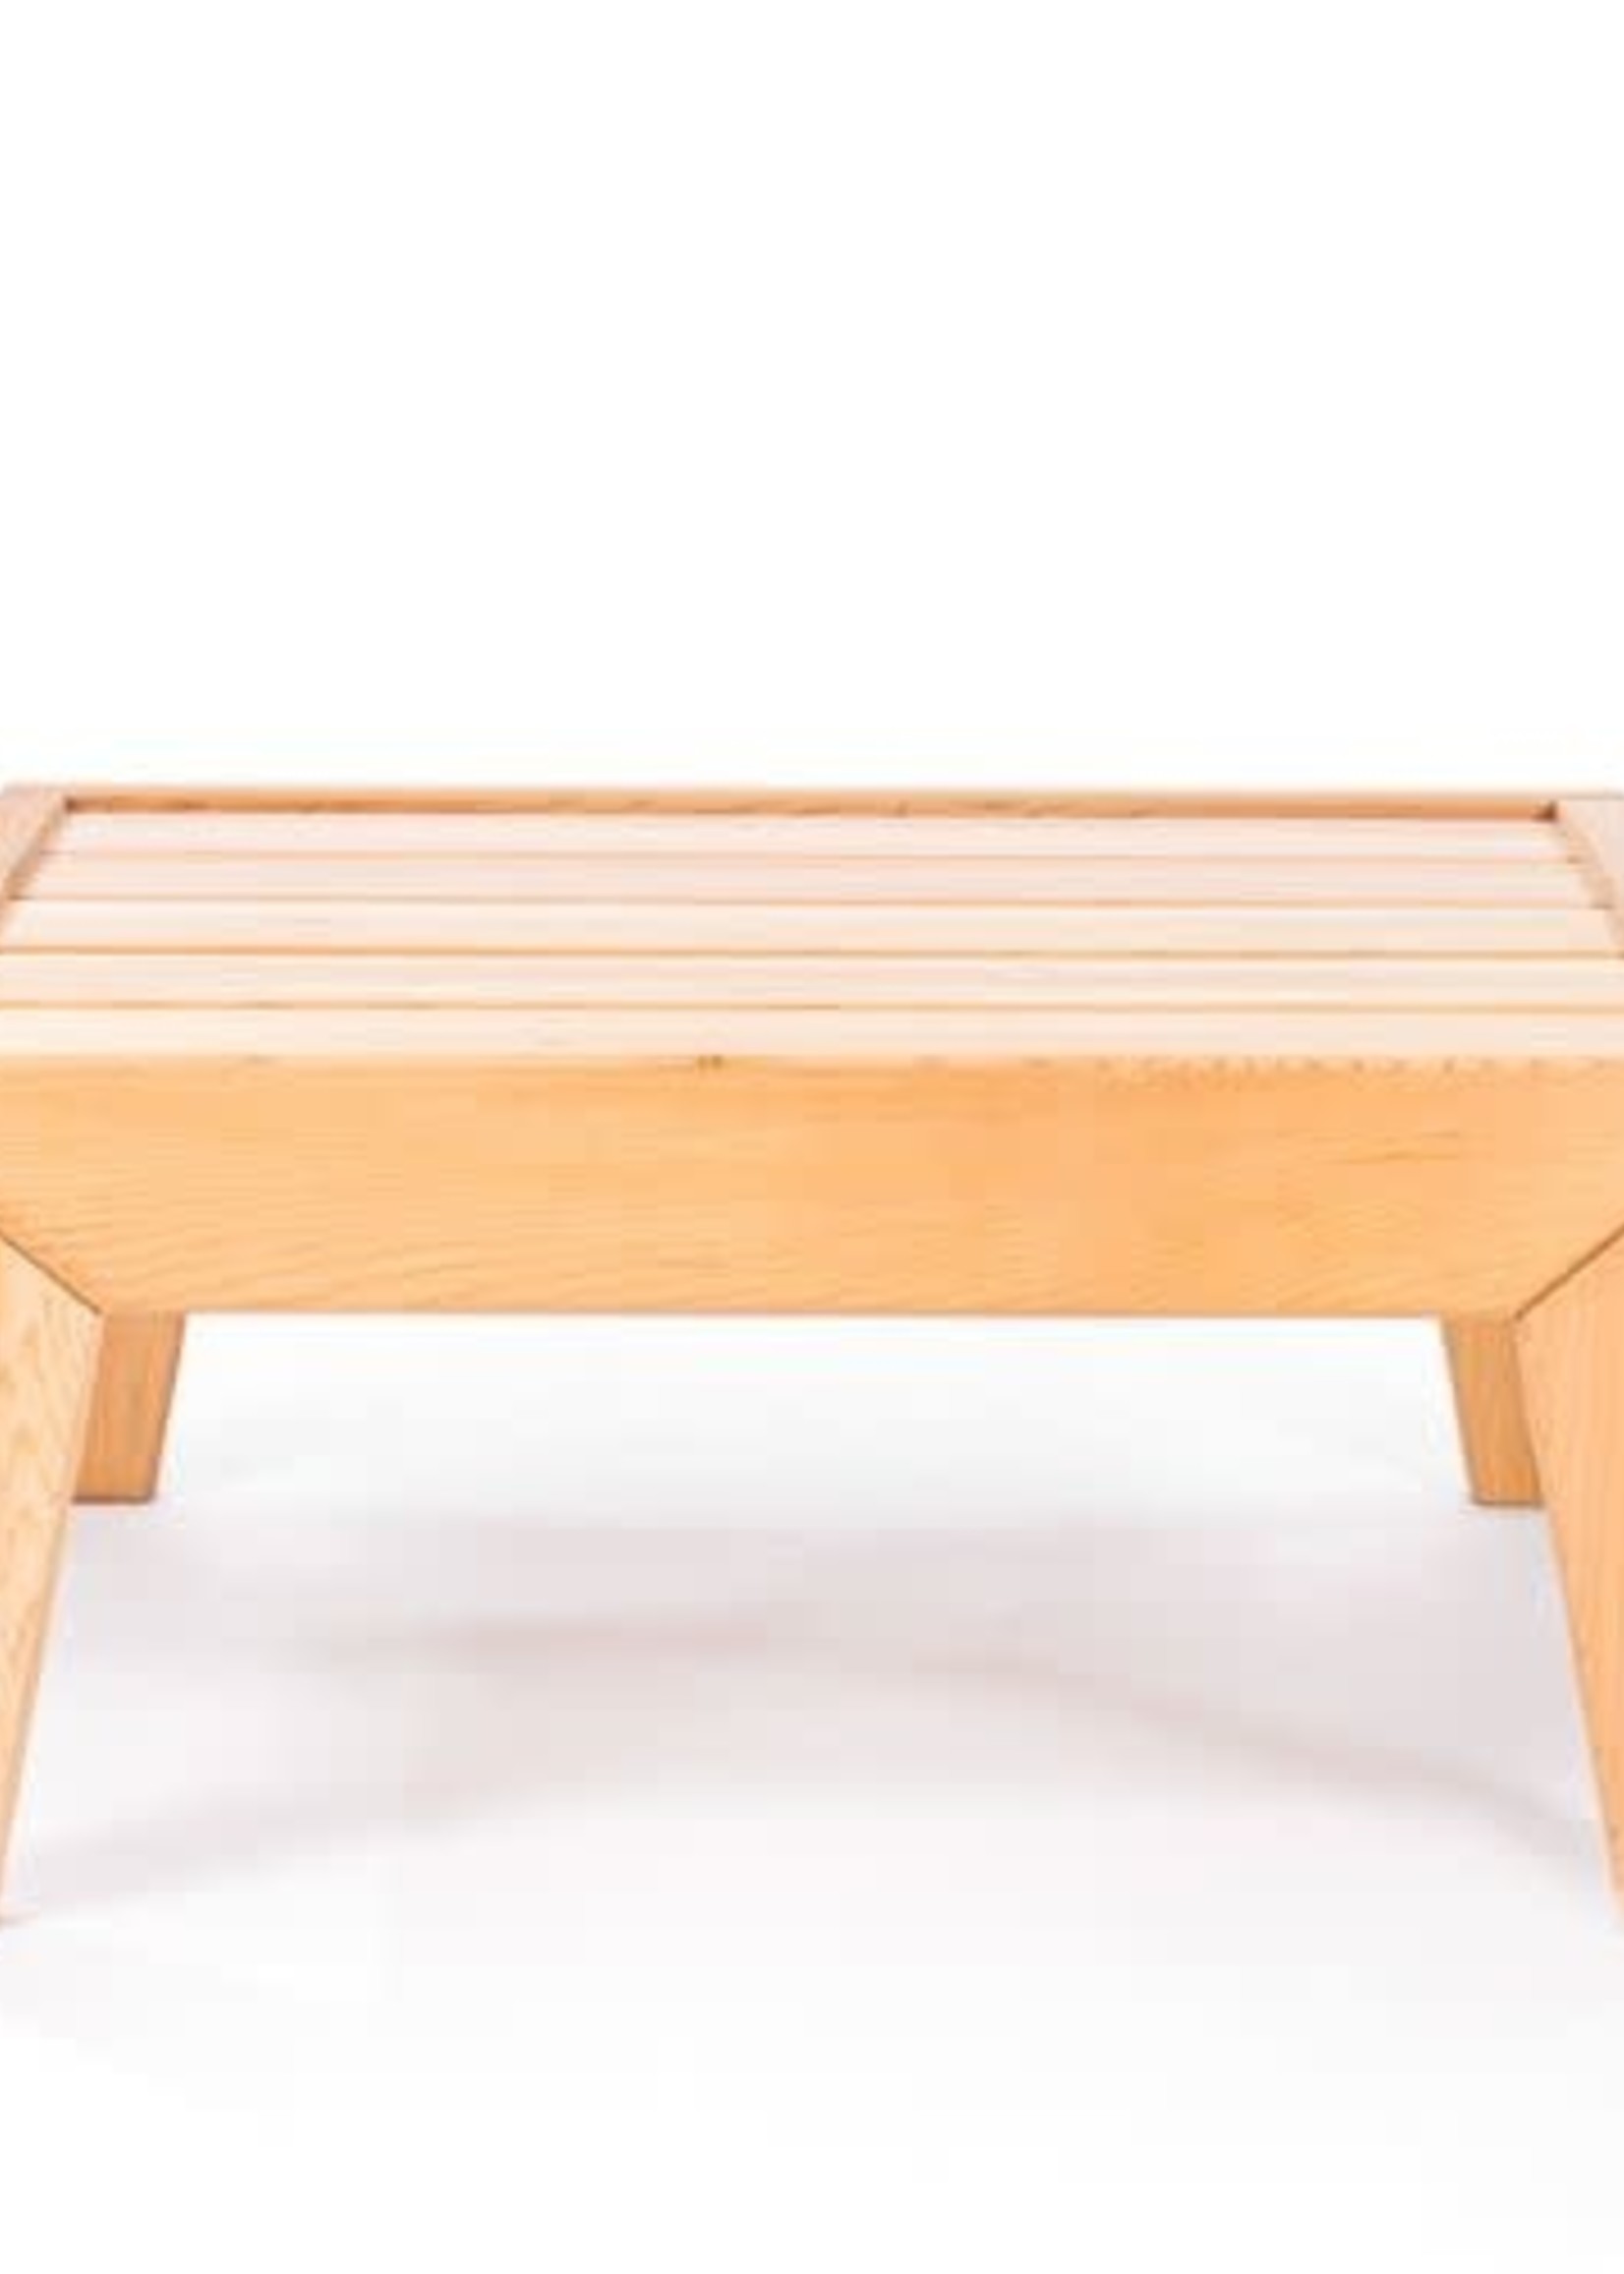 Canadian Timber Canadian Timber Pacific Modern Coffee Table